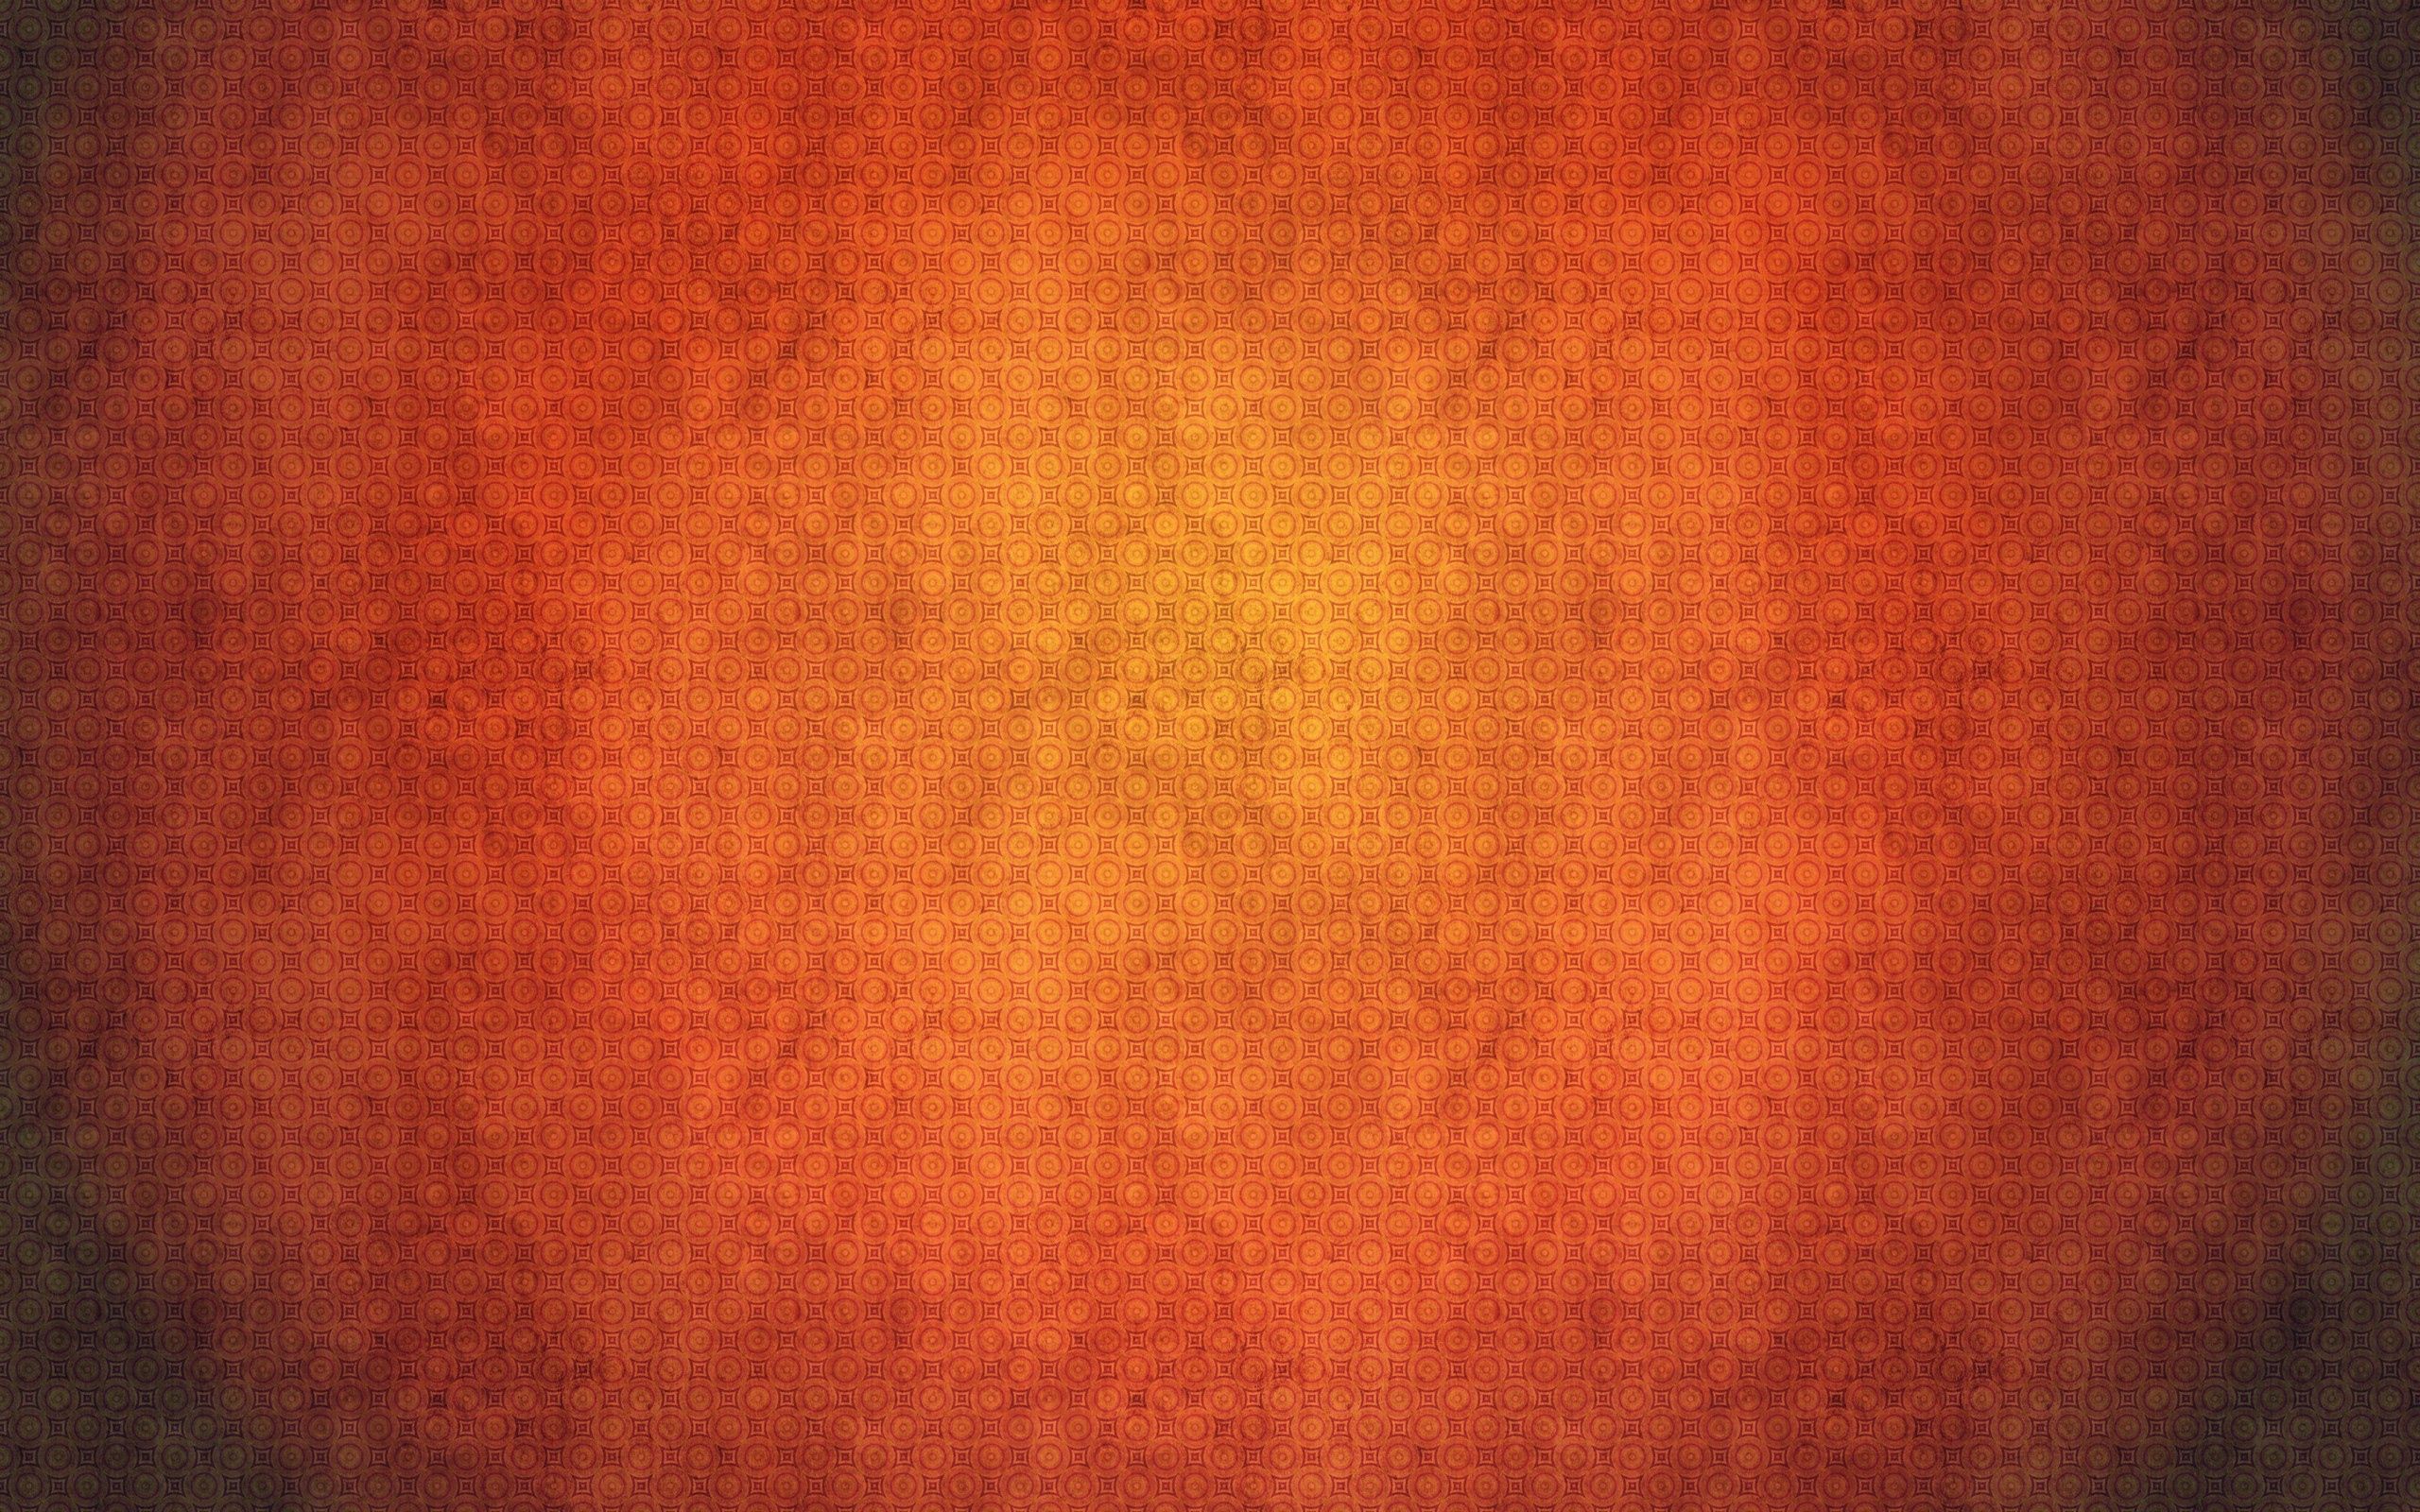 154415 free download Orange wallpapers for phone, texture, shadow, textures Orange images and screensavers for mobile